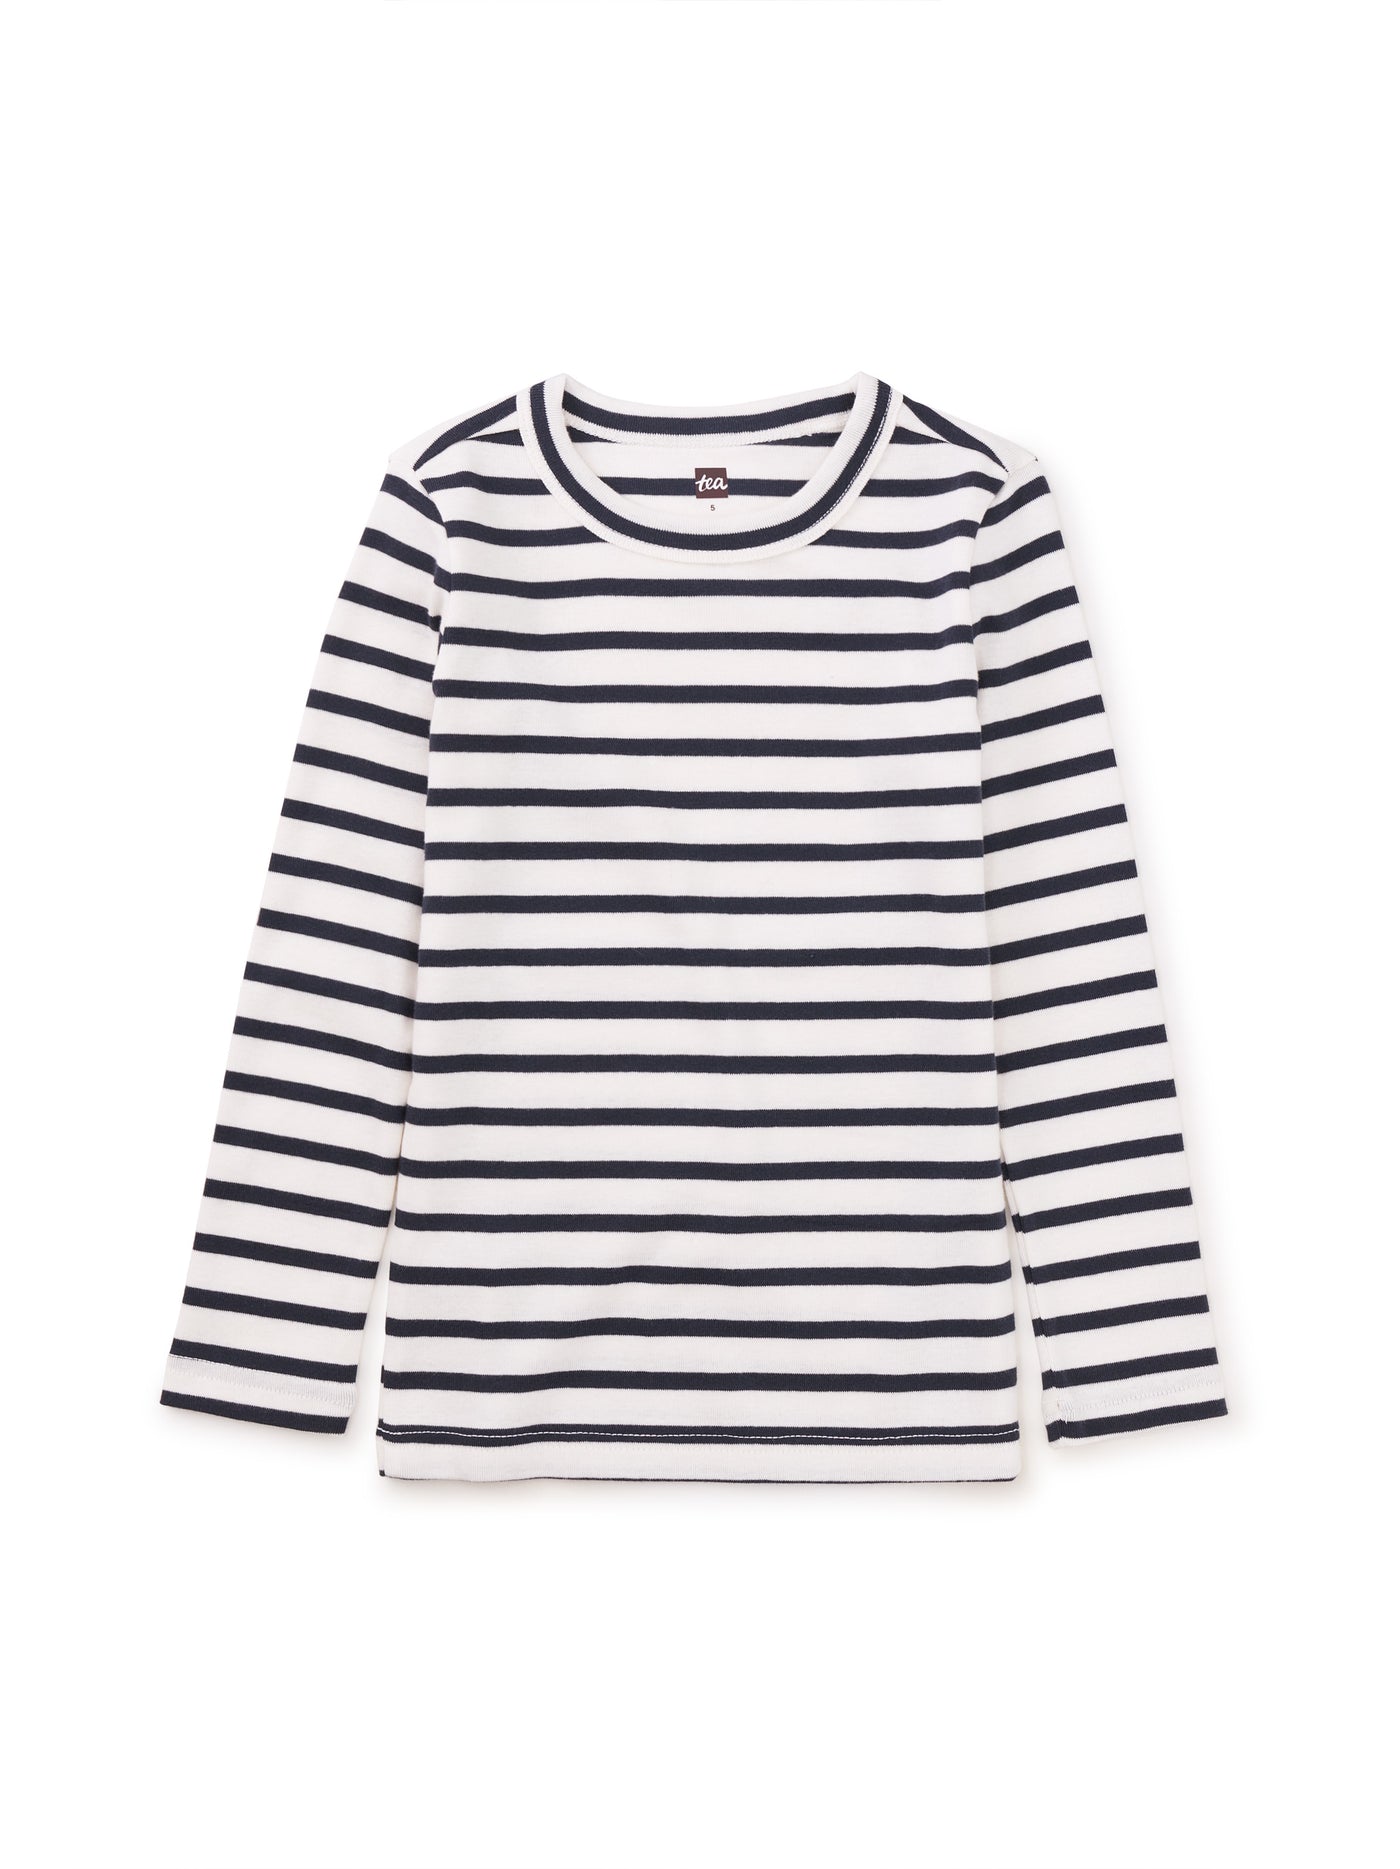 Tea Collection Striped Tee